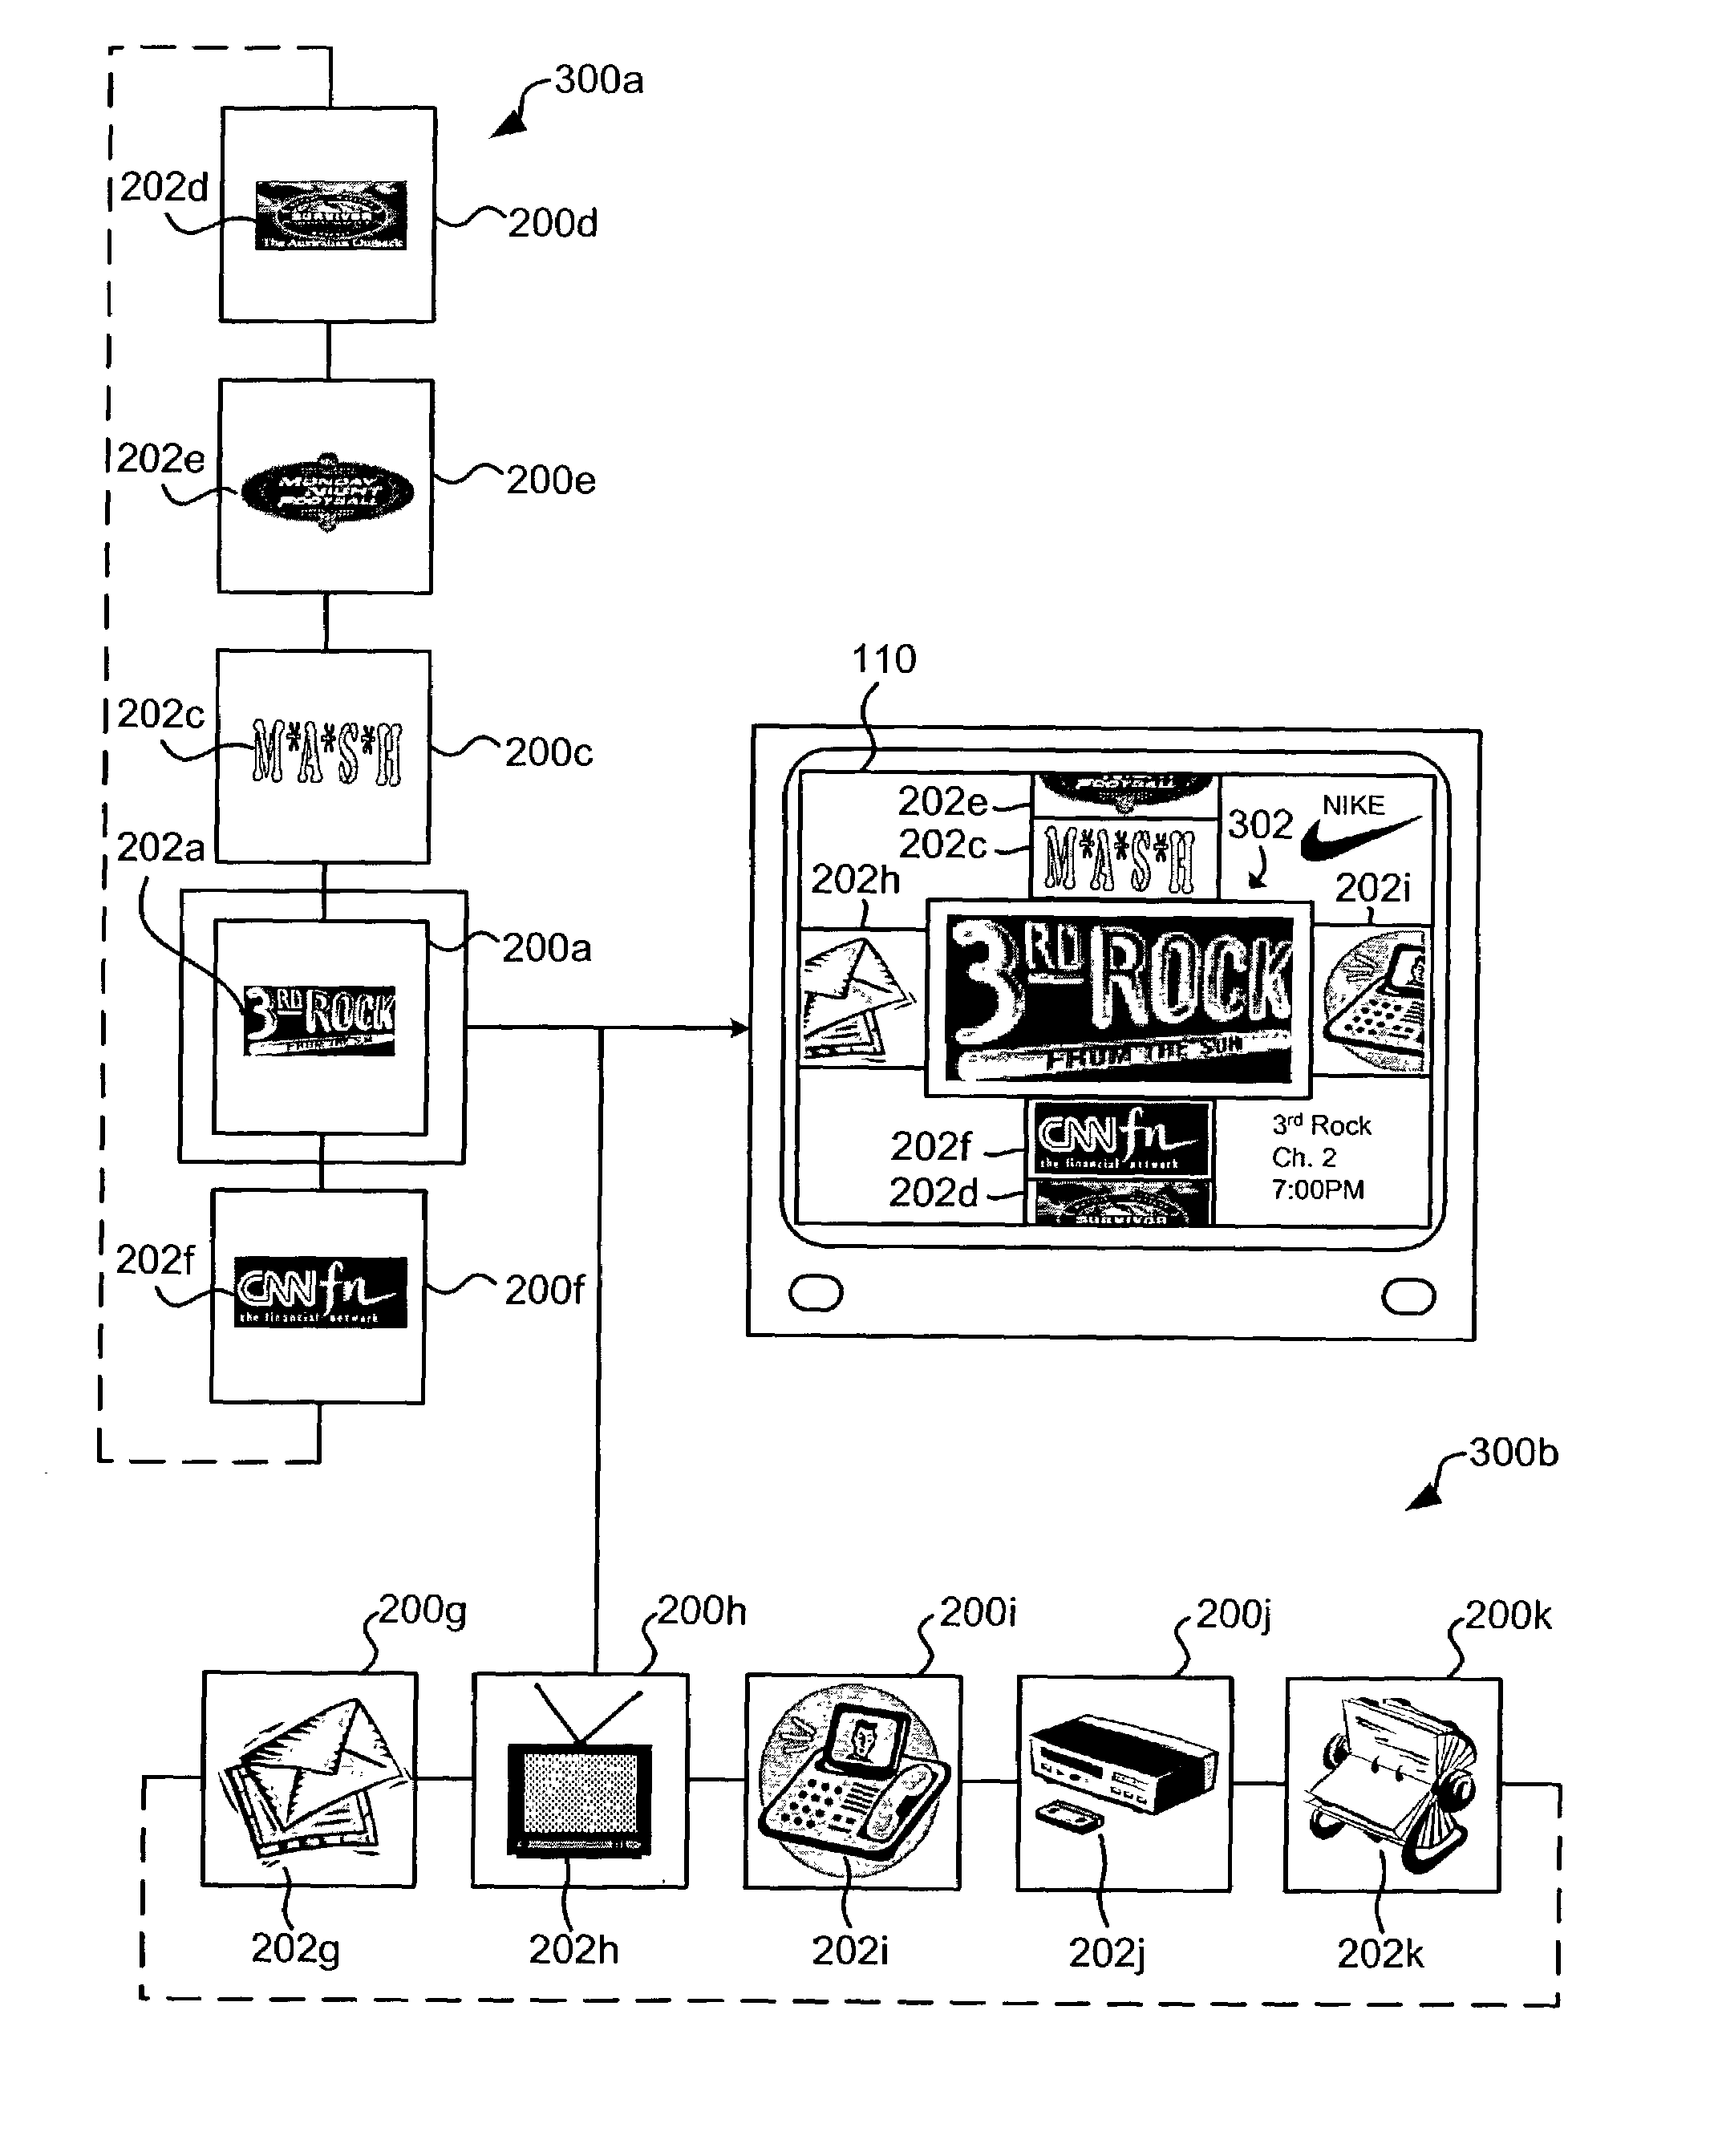 System and method for capturing video frames for focused navigation within a user interface